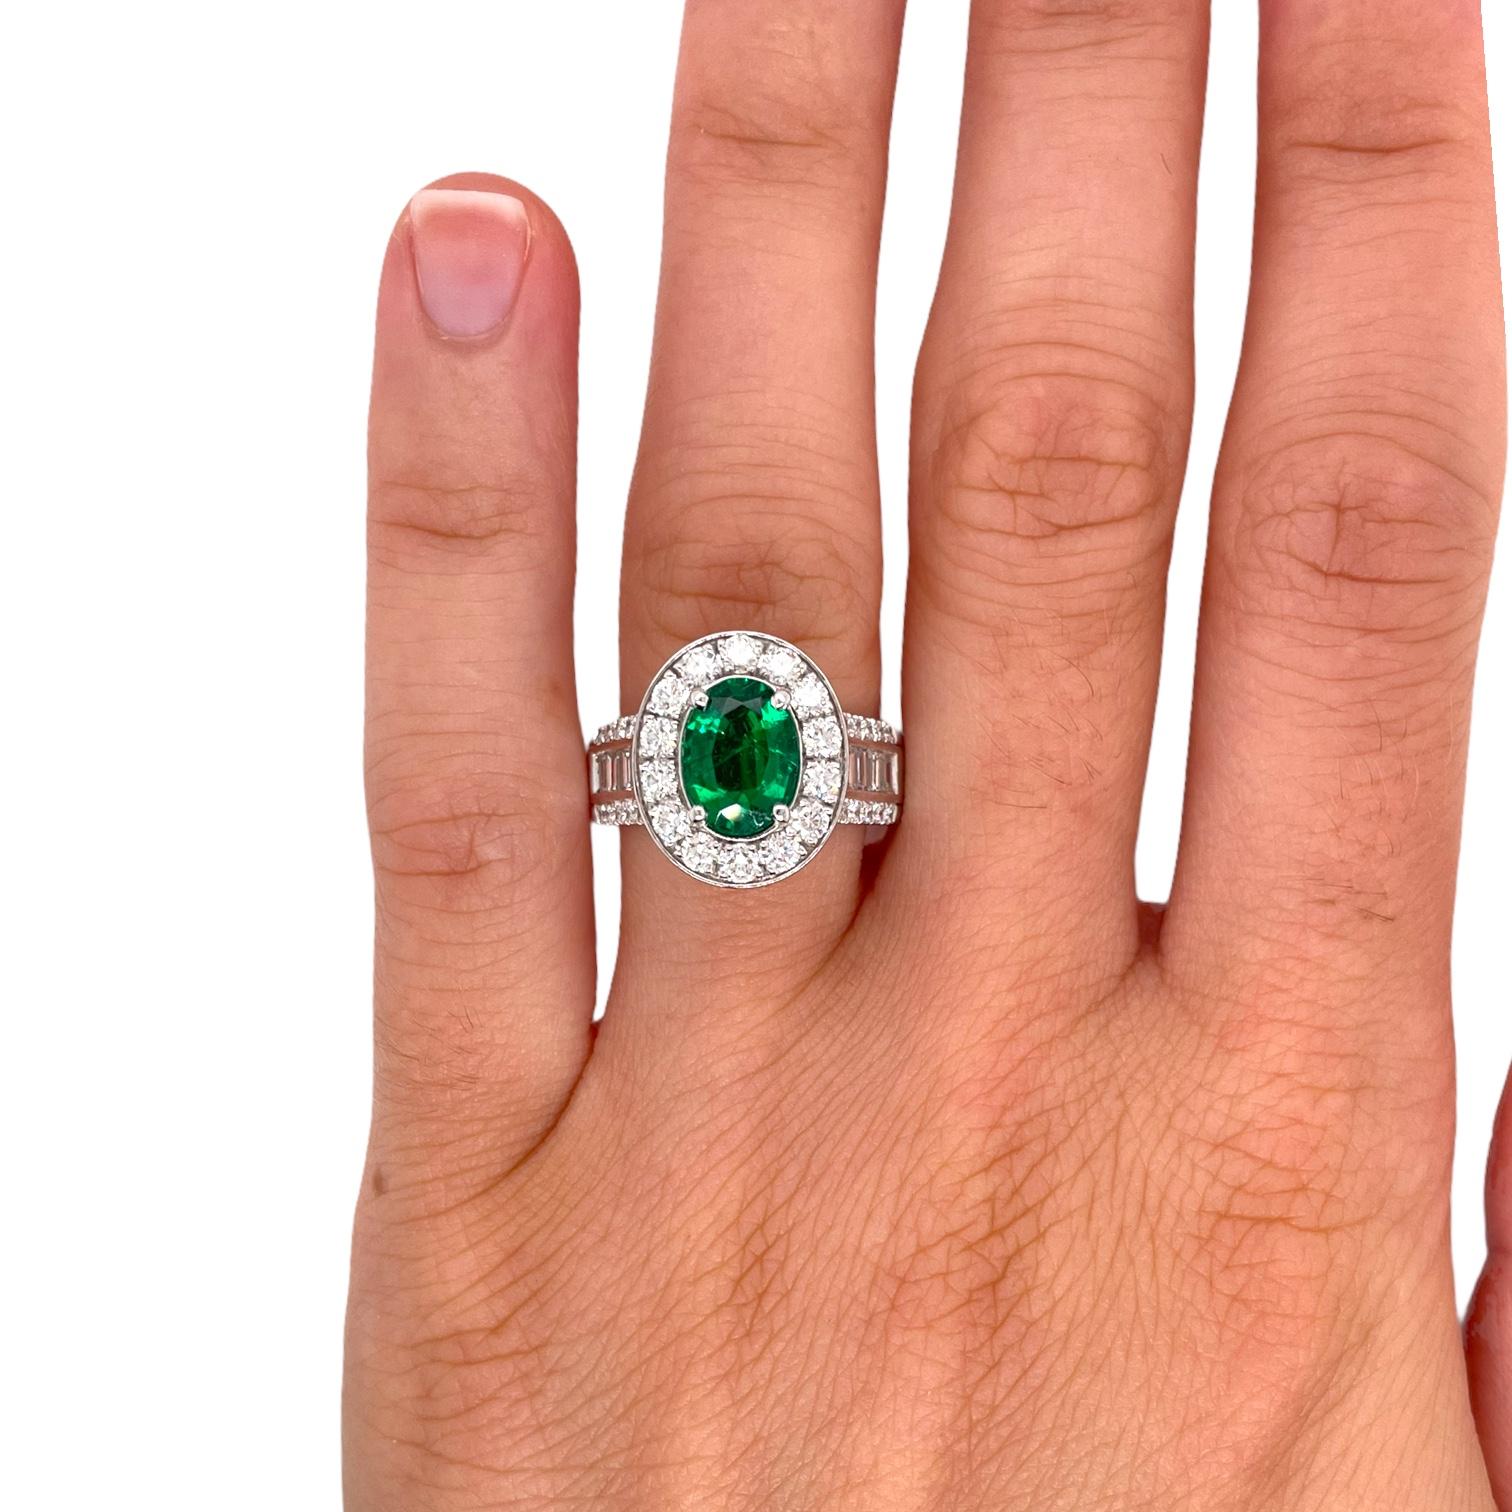 Fine oval emerald and diamond ring in 18k white gold. Ring contains 1 center 9x6mm oval shape emerald 1.40ct, round brilliant diamonds 1.12tcw and baguette diamonds 0.70tcw. Top of ring measures approximately 15x12mm and band measures 6.8mm tapering